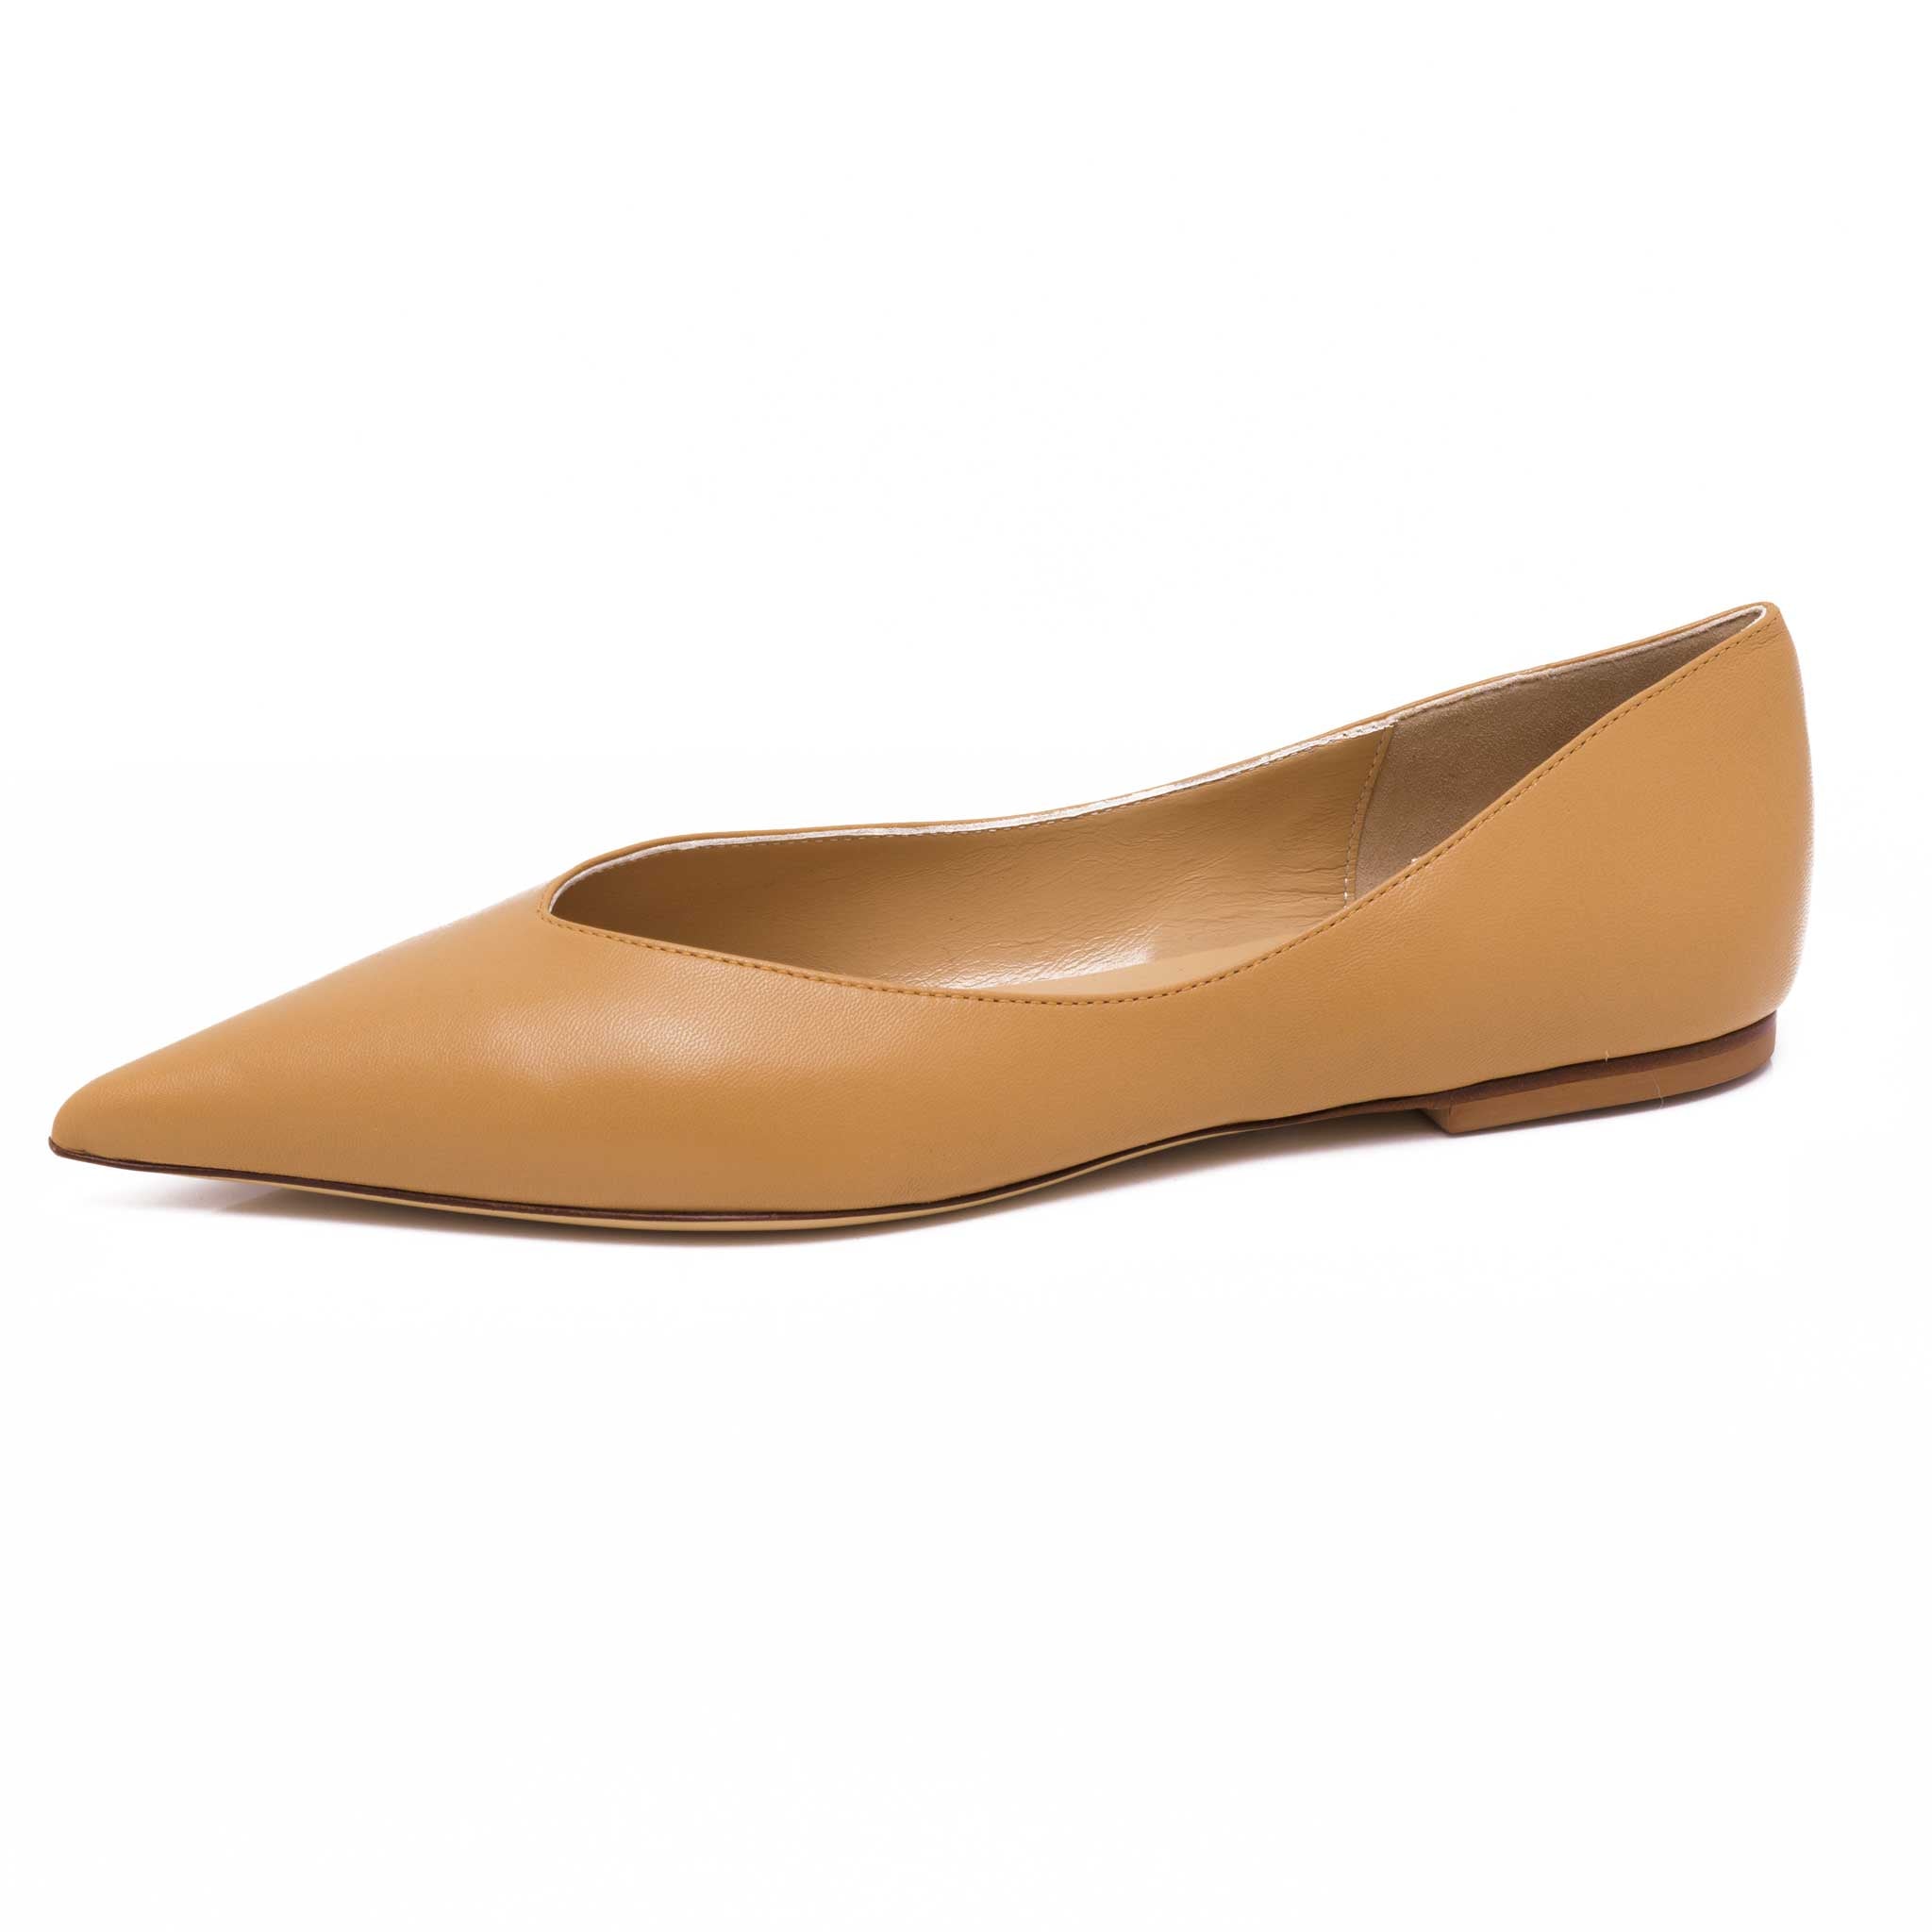 camel tan leather flat slip on shoes for women made in Italy with very pointed toe